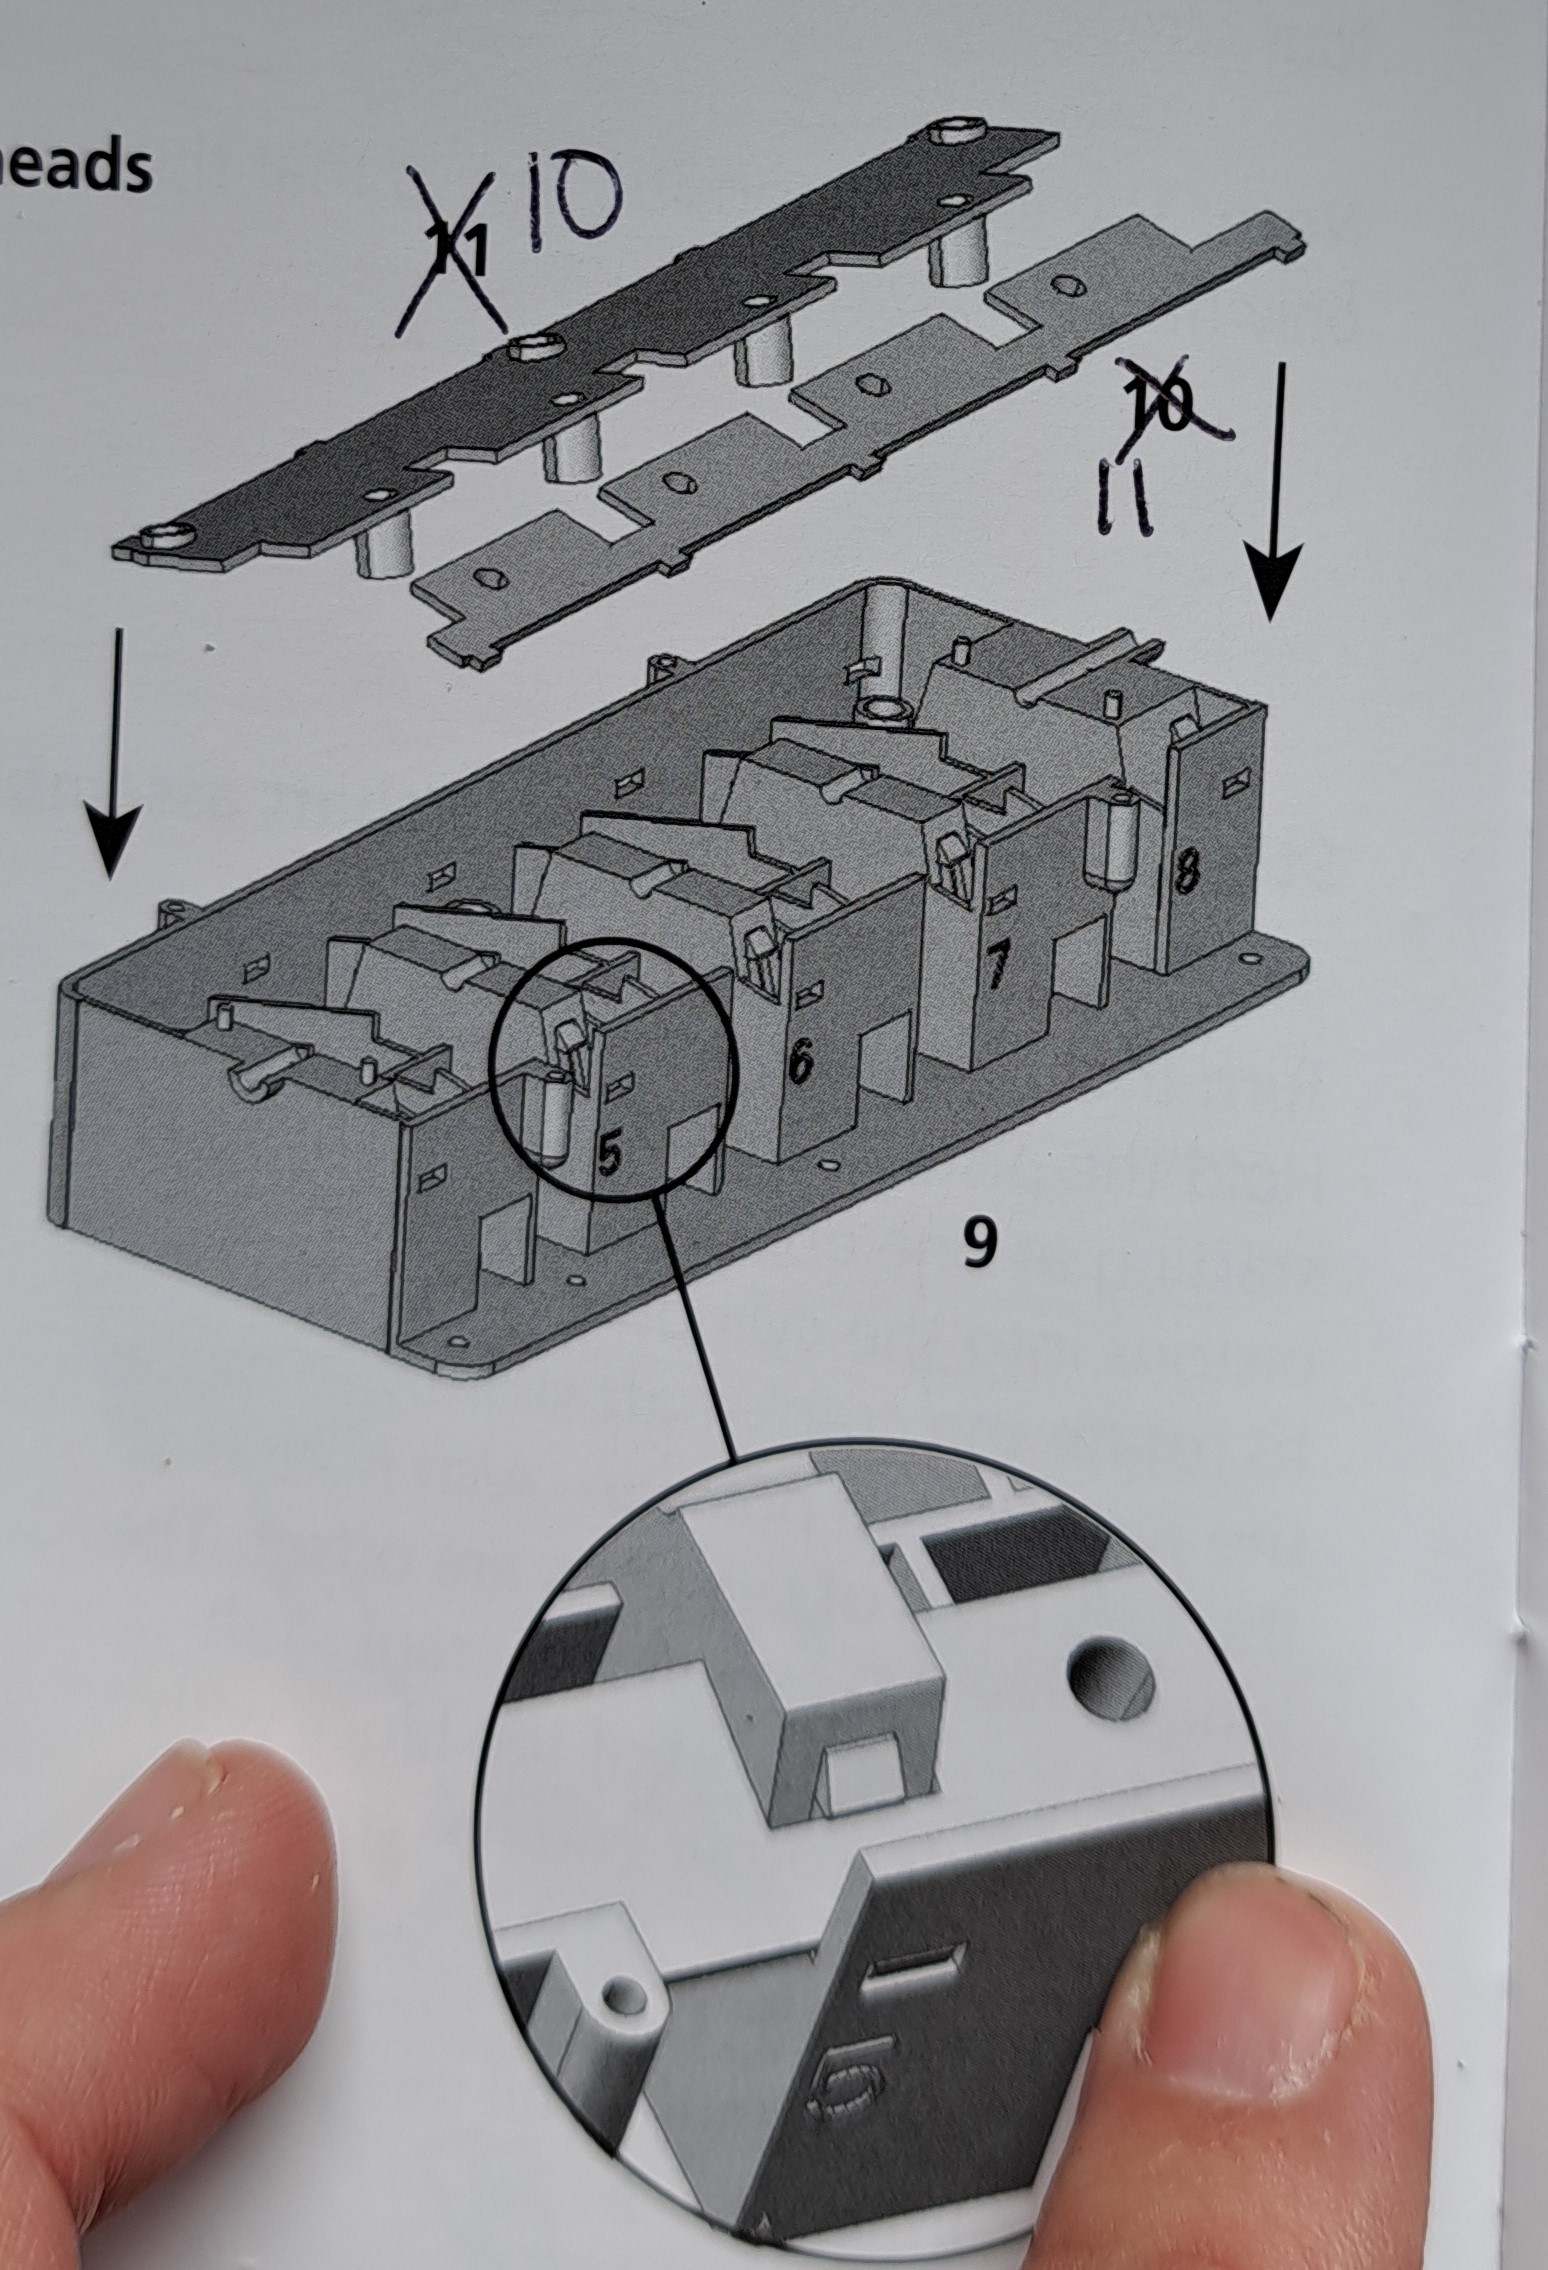 Parts 10 and 11 mislabelled on Side A